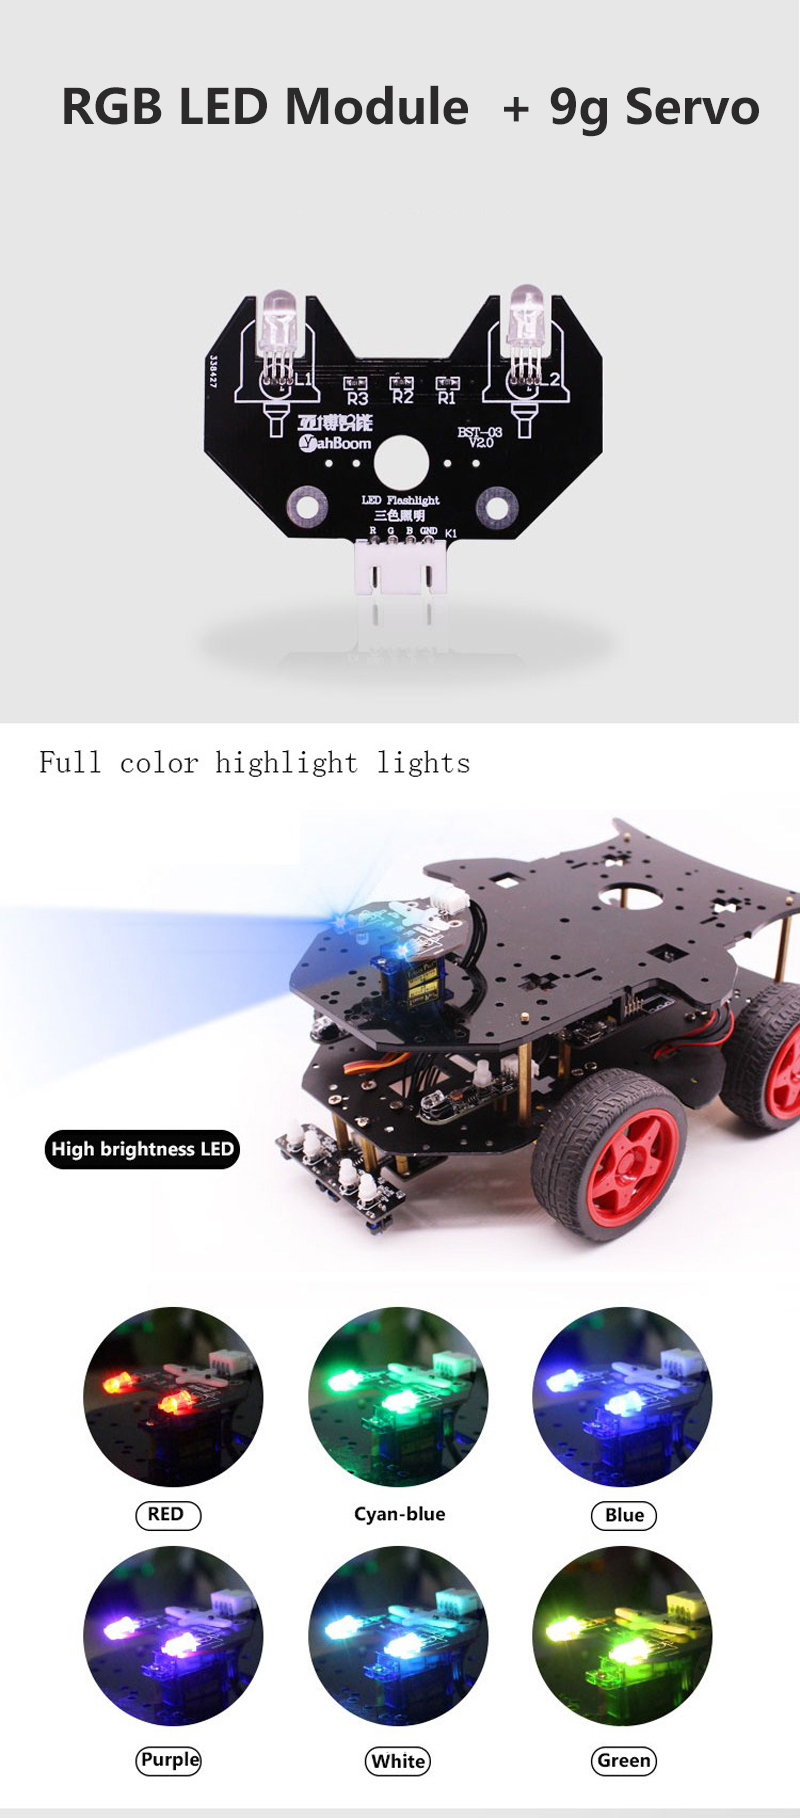 5V 5mm High-Brightness Colorful RGB LED Module with 9G Servo + Fixed Colums for Smart Robot Car